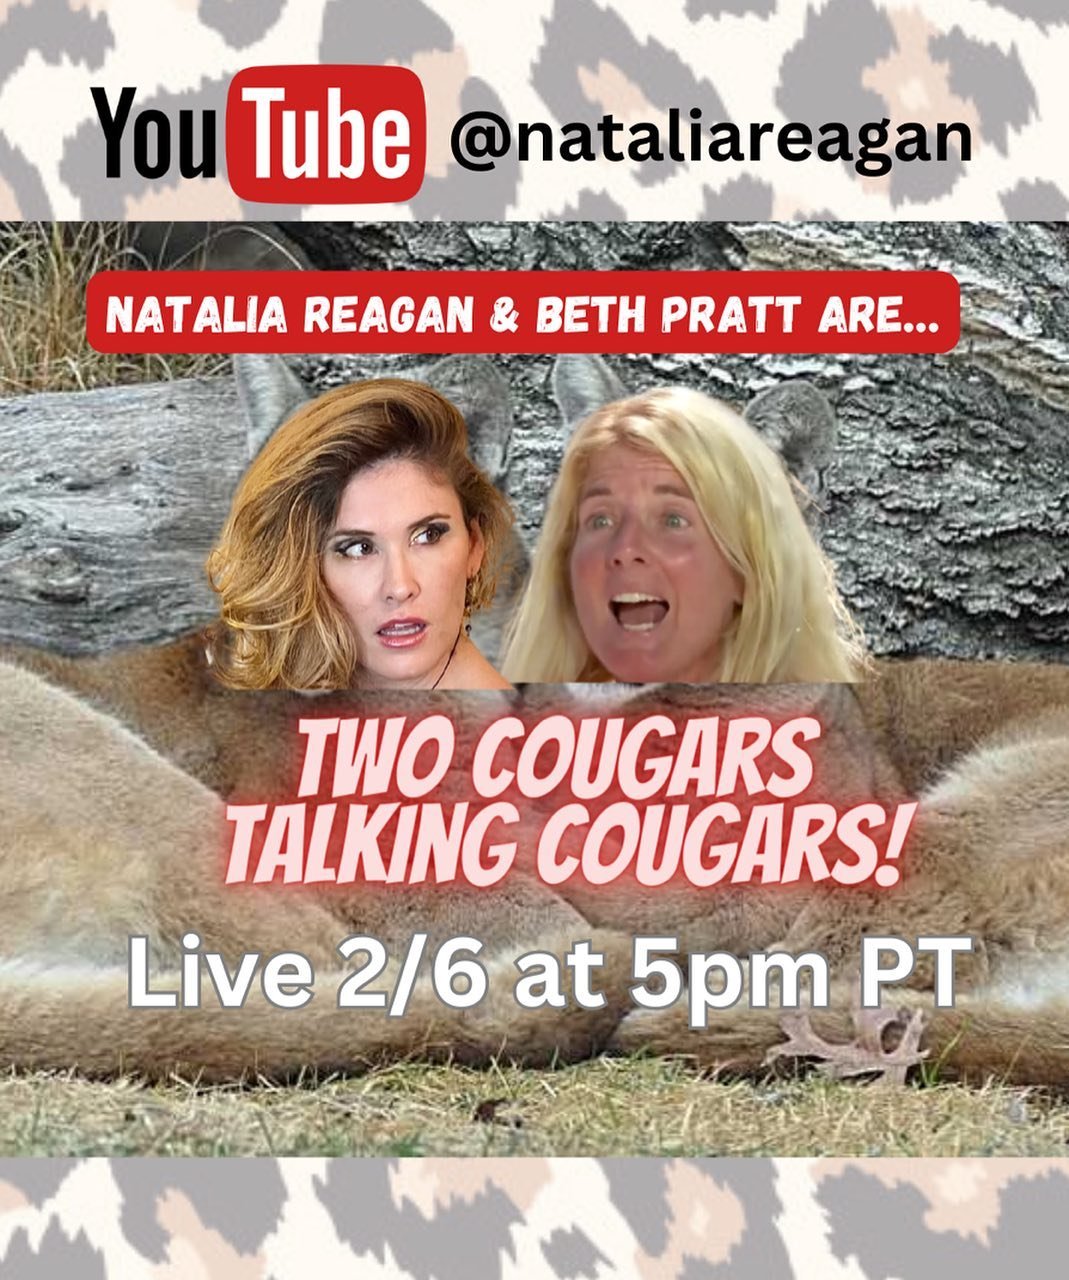 Behold! Today (2/6 at 5pm PT) I&rsquo;m live on YouTube with wildlife advocate, author, California director of the National Wildlife Federation, AND dear friend @yosemitebethy. Beth is HILARIOUS &amp; one of the main reasons the world fell in love wi